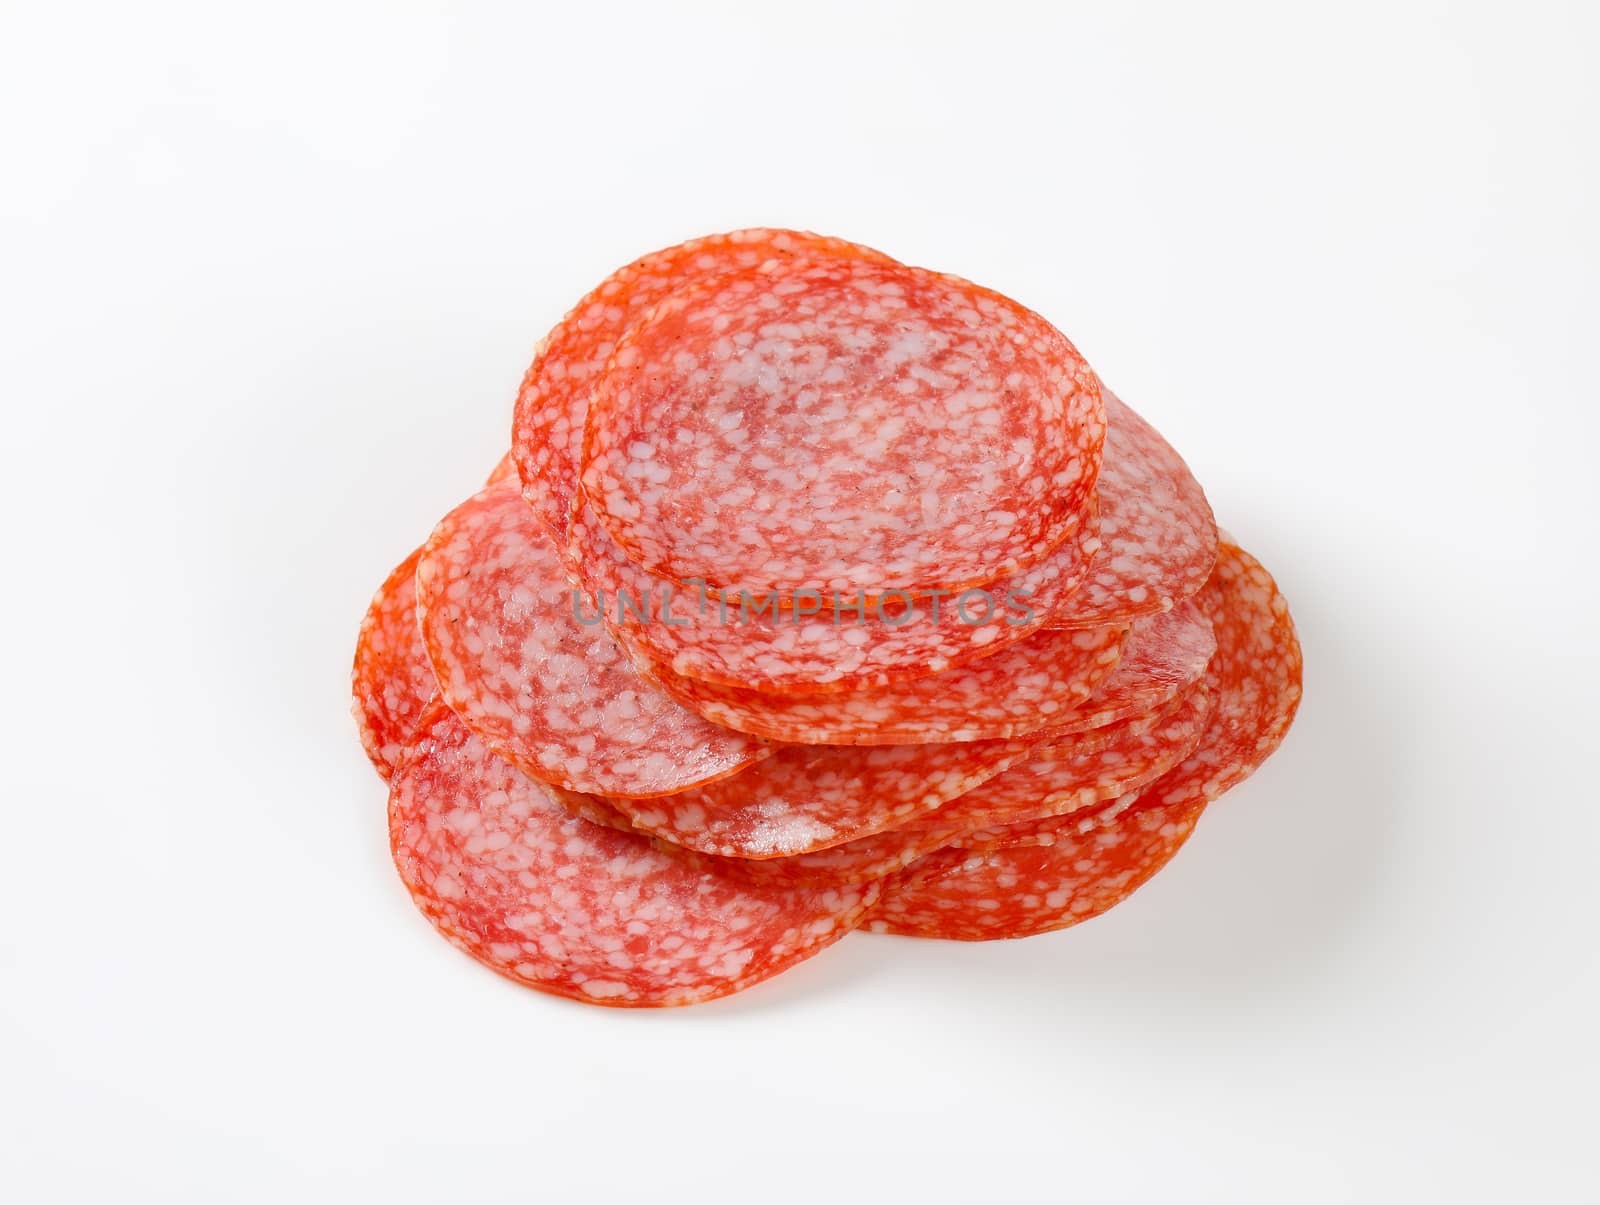 Thinly sliced salami sausage by Digifoodstock